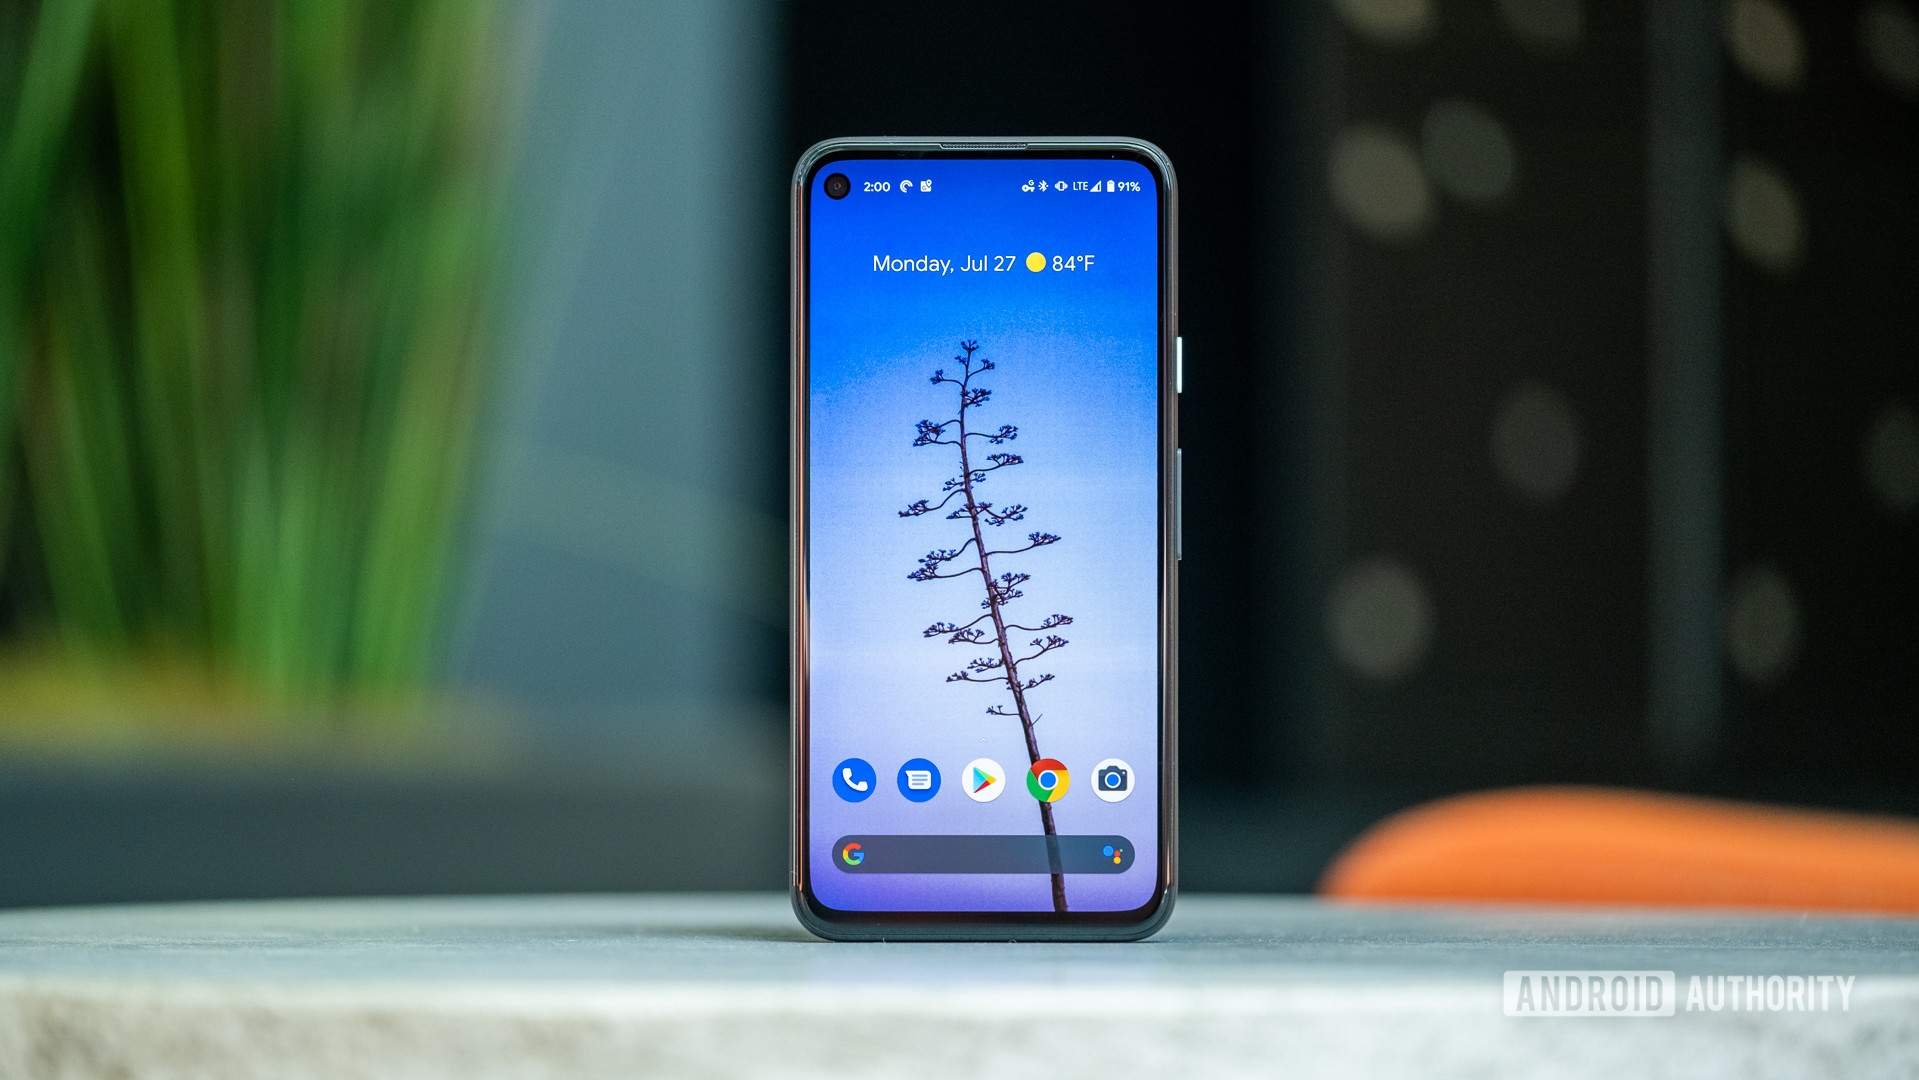 Google Pixel 4a display standing stright